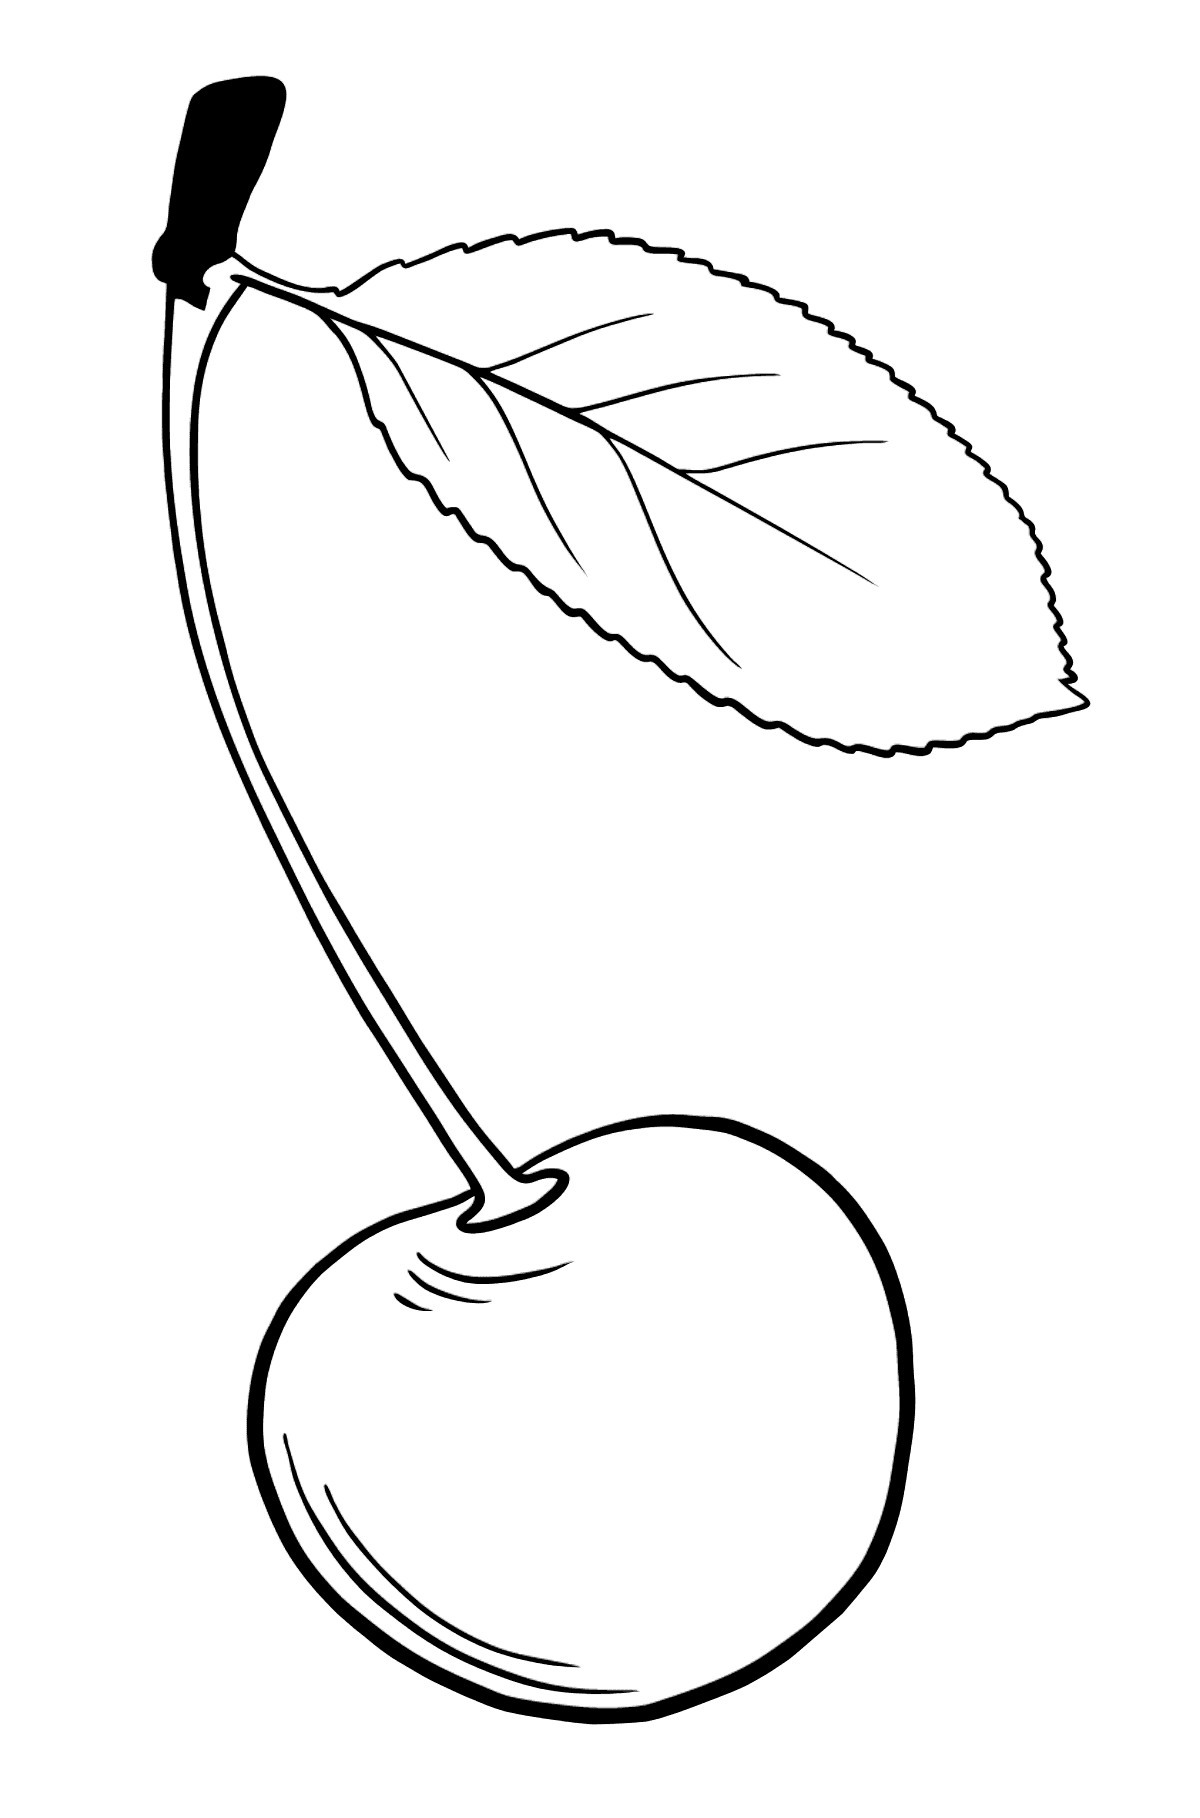 Cherry coloring page - Coloring Pages for Kids